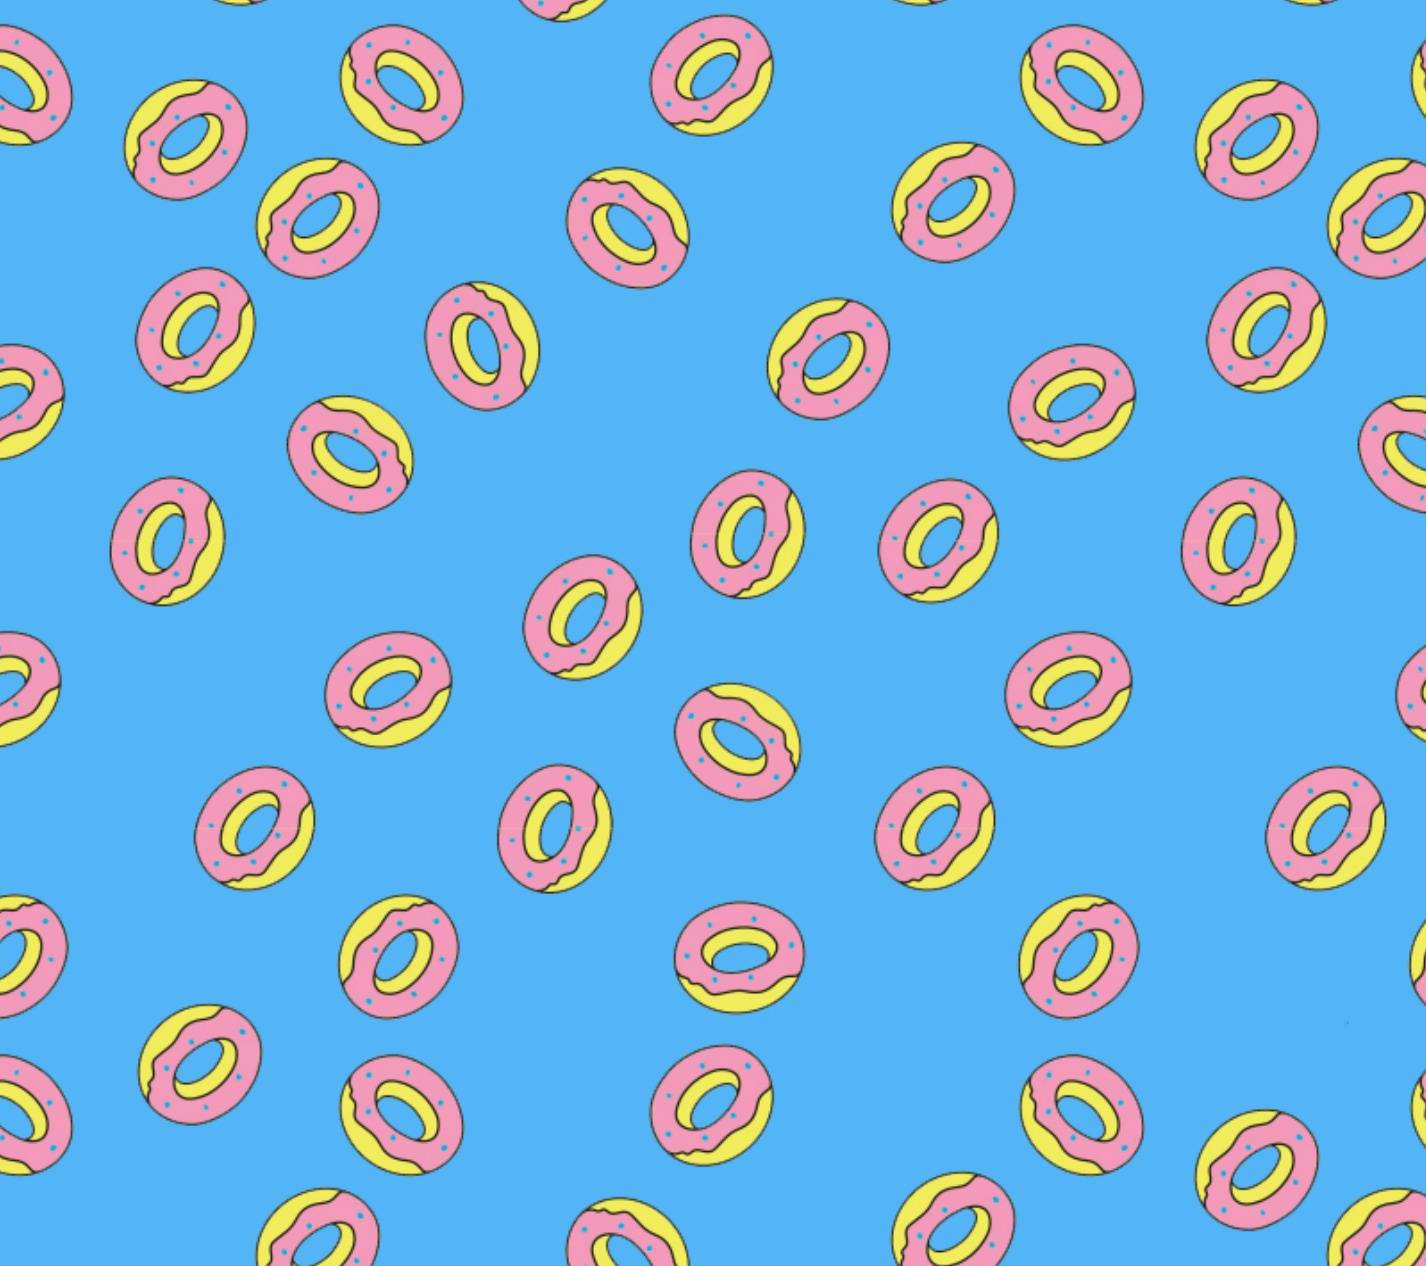 Donuts On Sky-blue